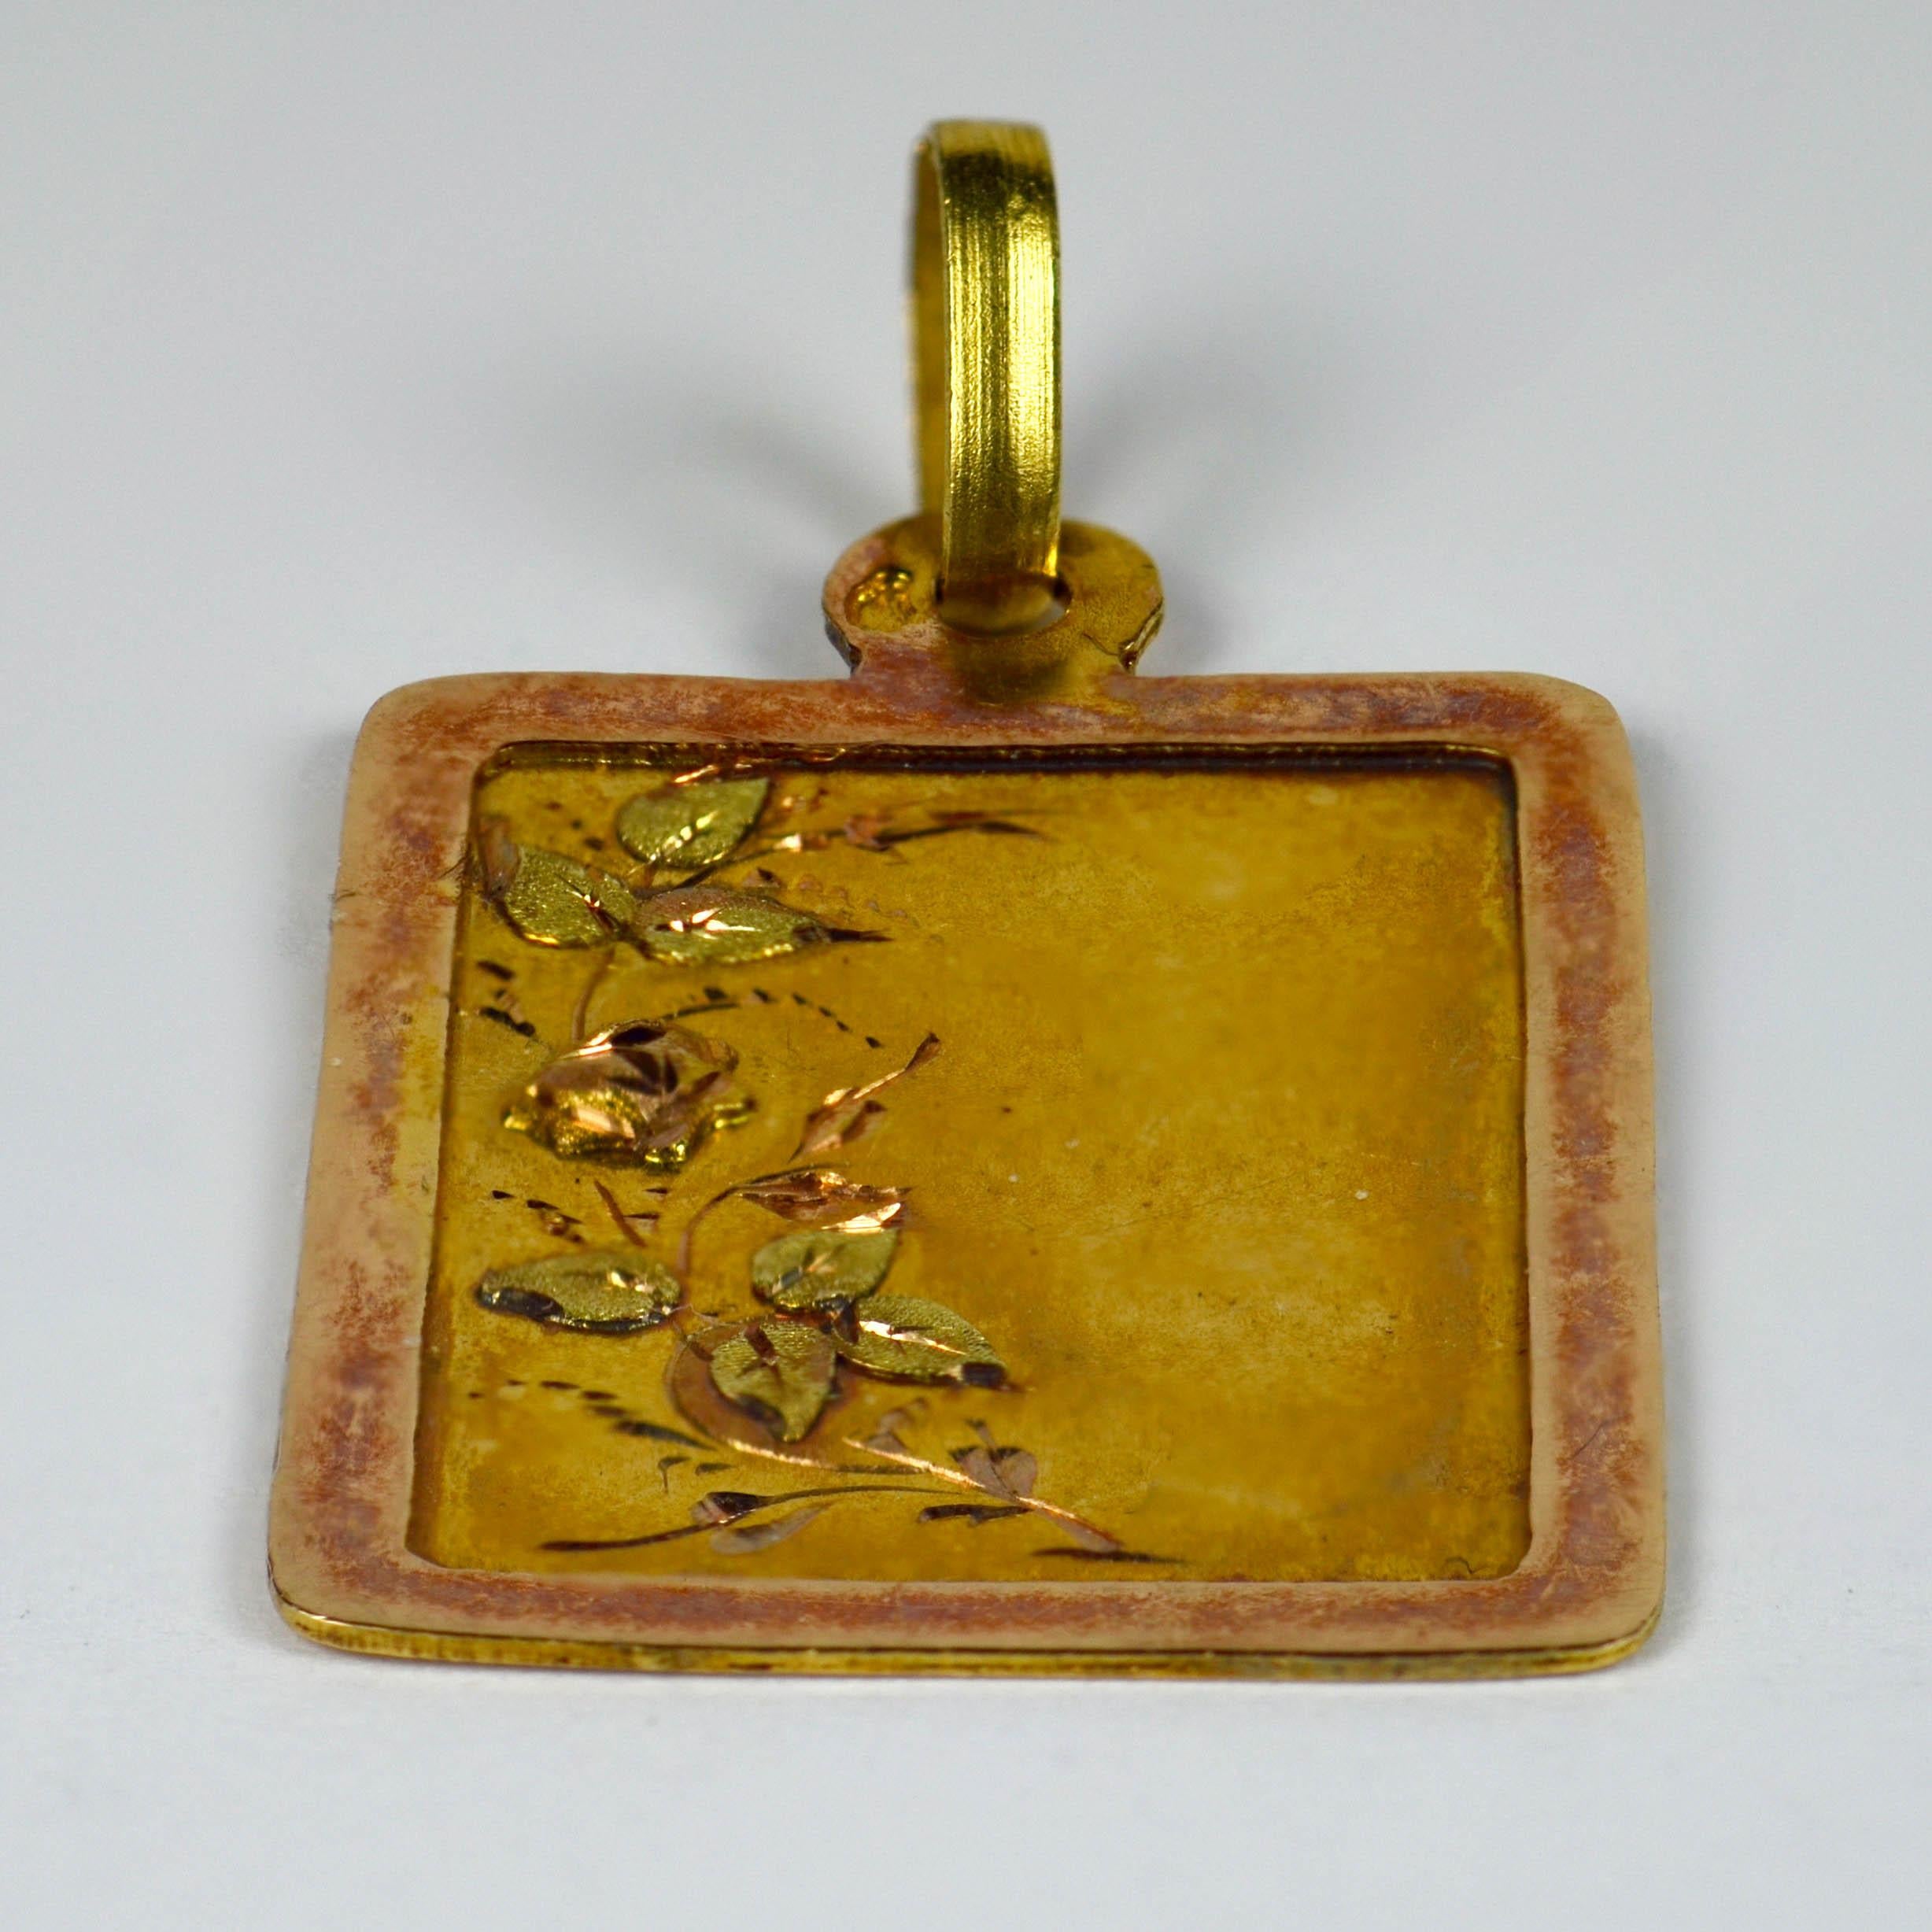 An Art Nouveau French charm or pendant depicting an 18 karat rose gold rectangular frame with a yellow and coloured gold floral decoration within.
Stamped with the eagle's head for 18 karat gold and French manufacture with an unknown makers